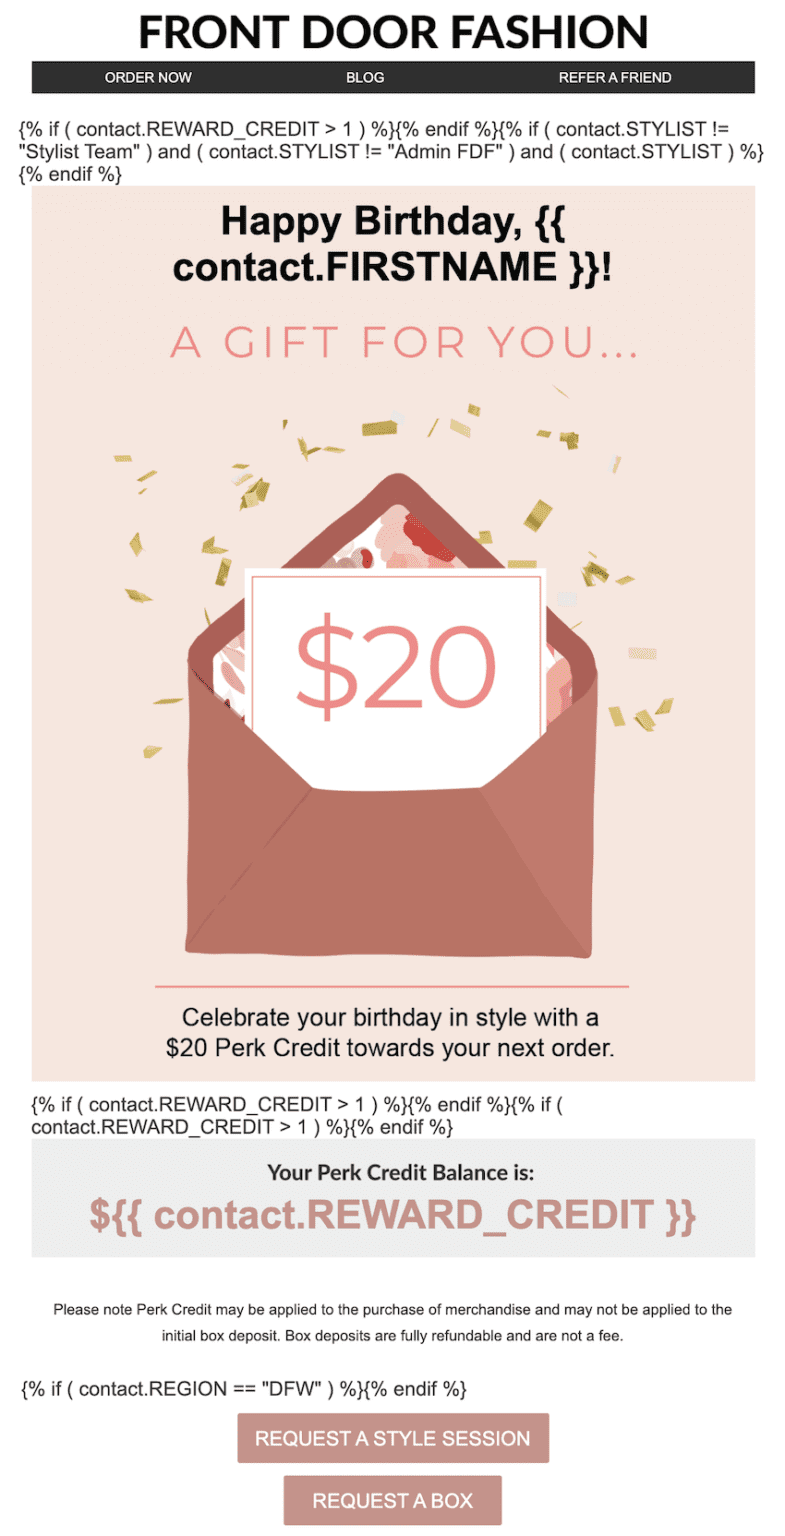 A happy birthday email personalization example. This shows an email with a pink background and an image of an envelope opening with sparkles saying "a gift for you". 